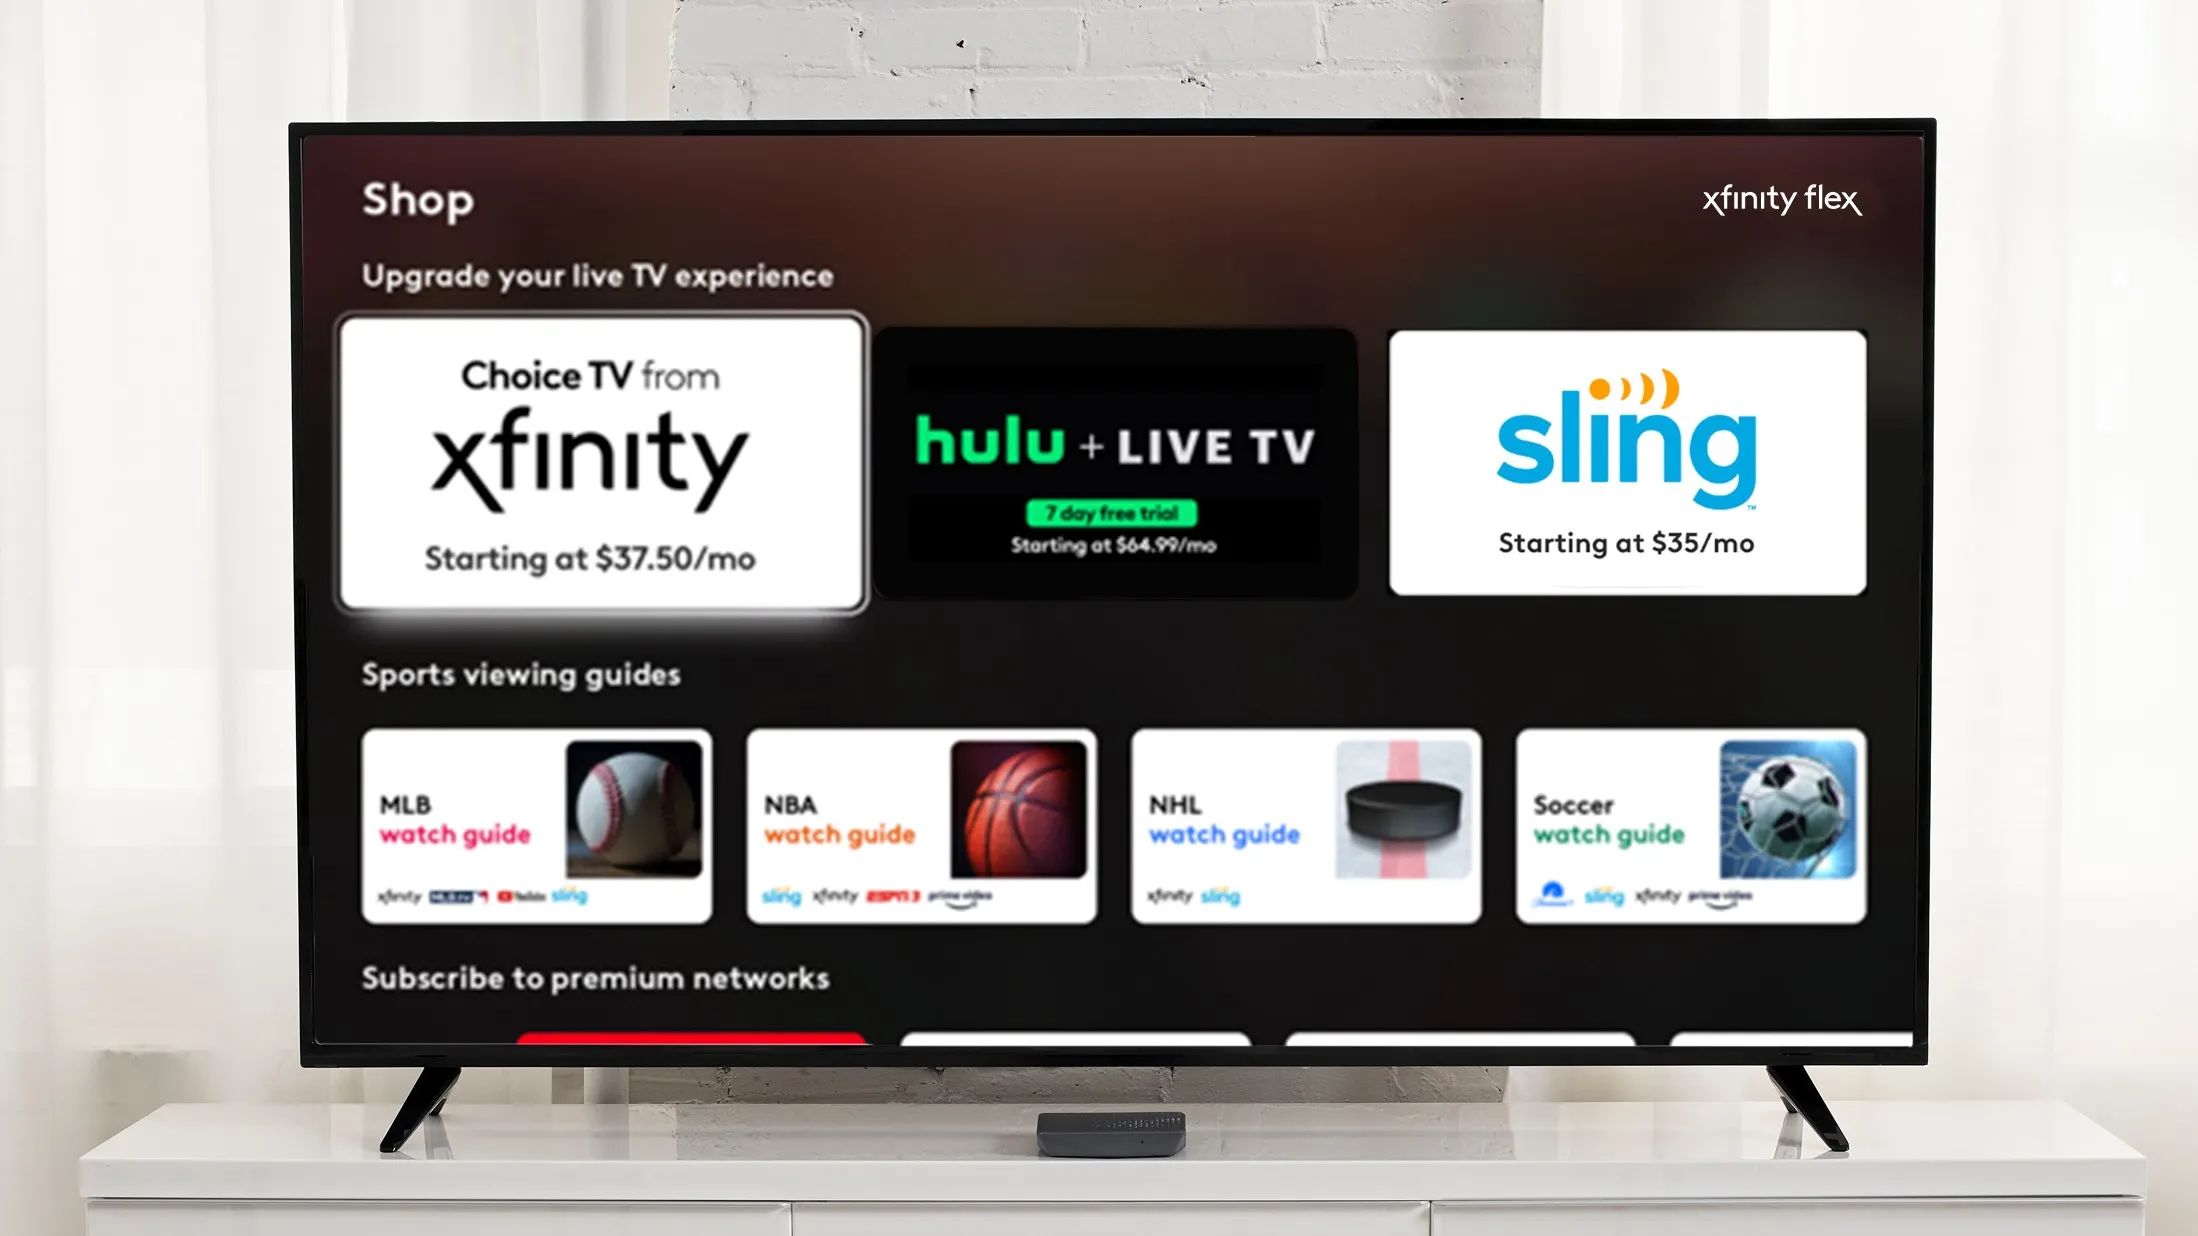 How To Sign Out Of Hulu On Smart TV